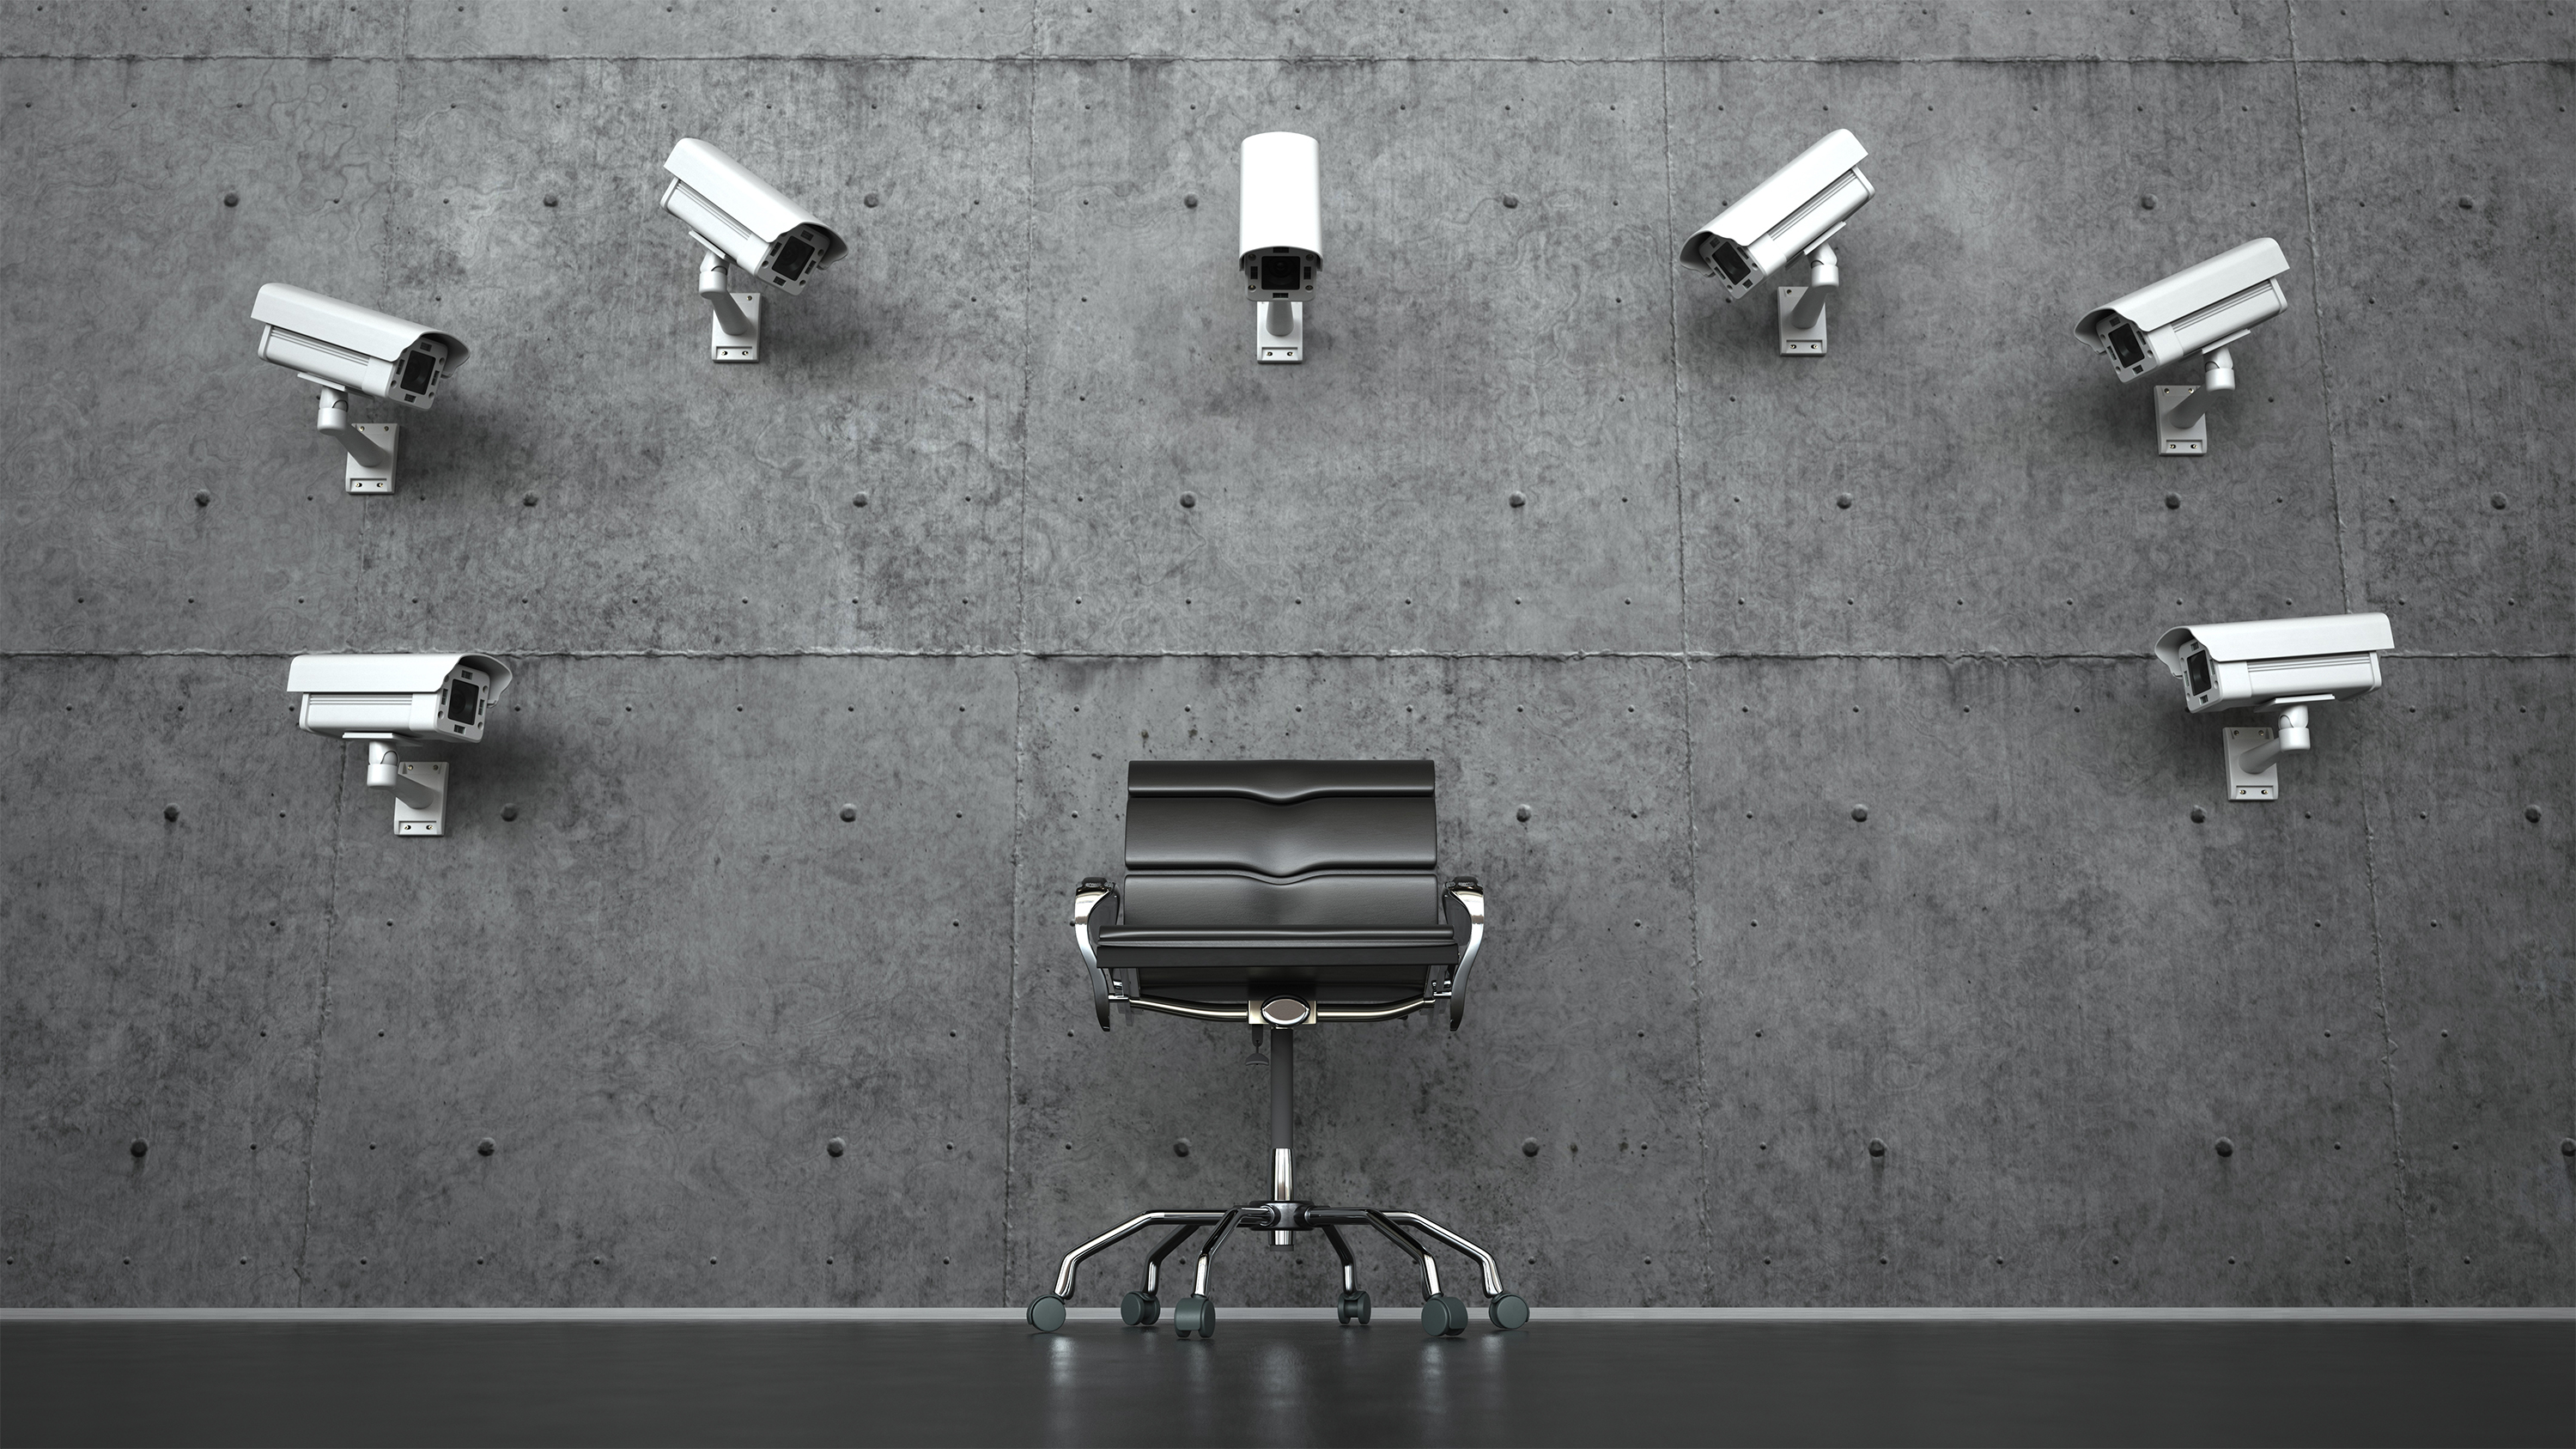 An array of CCTV cameras trained on an empty office chair.